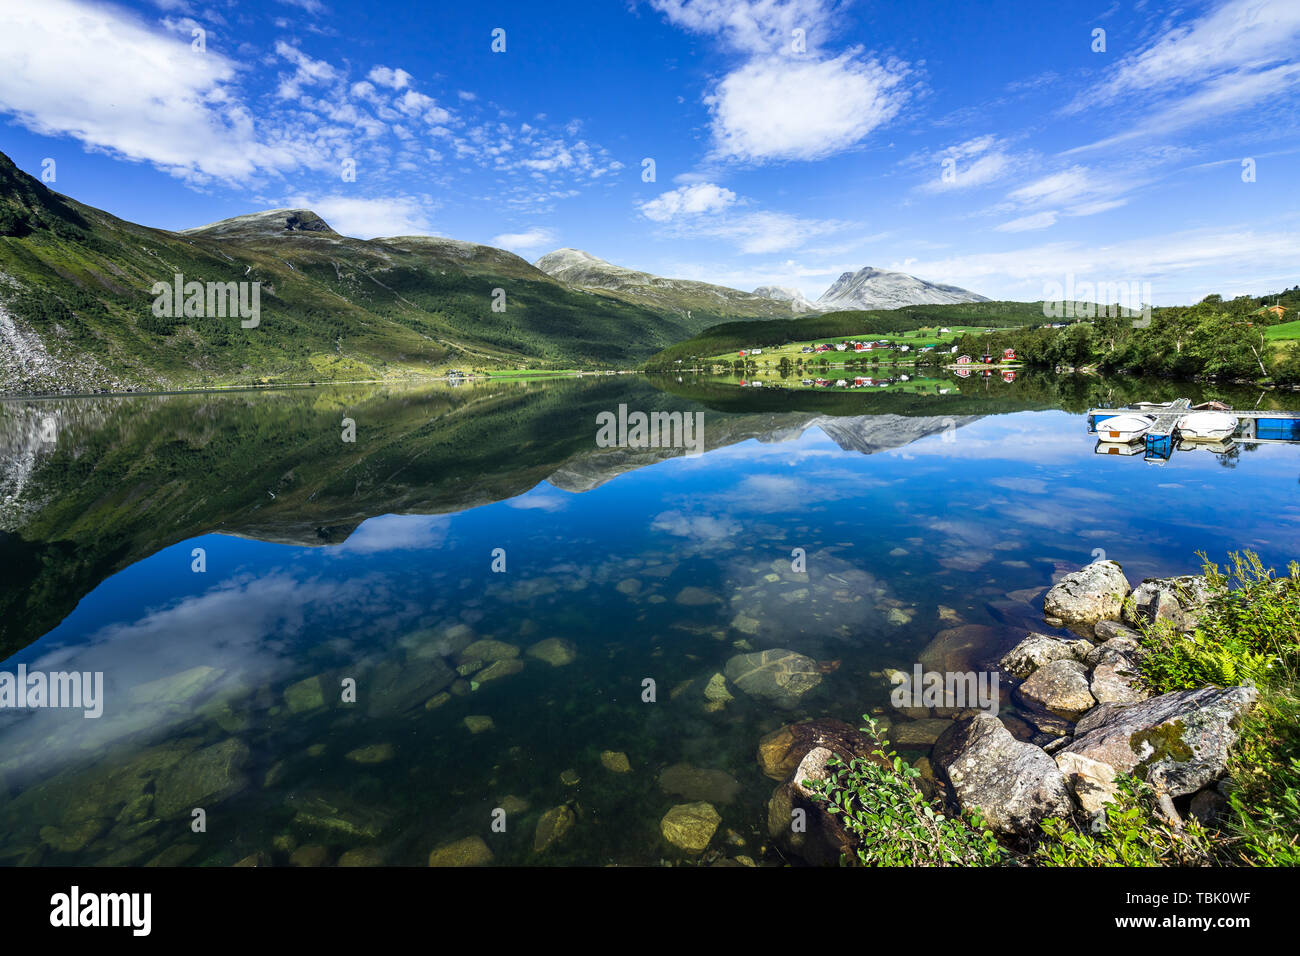 The amazing landscape of Eidsvatnet lake reflected in the water. Eidsvatnet lake is located between Geirangerfjord and Eidsdal, Norway Stock Photo